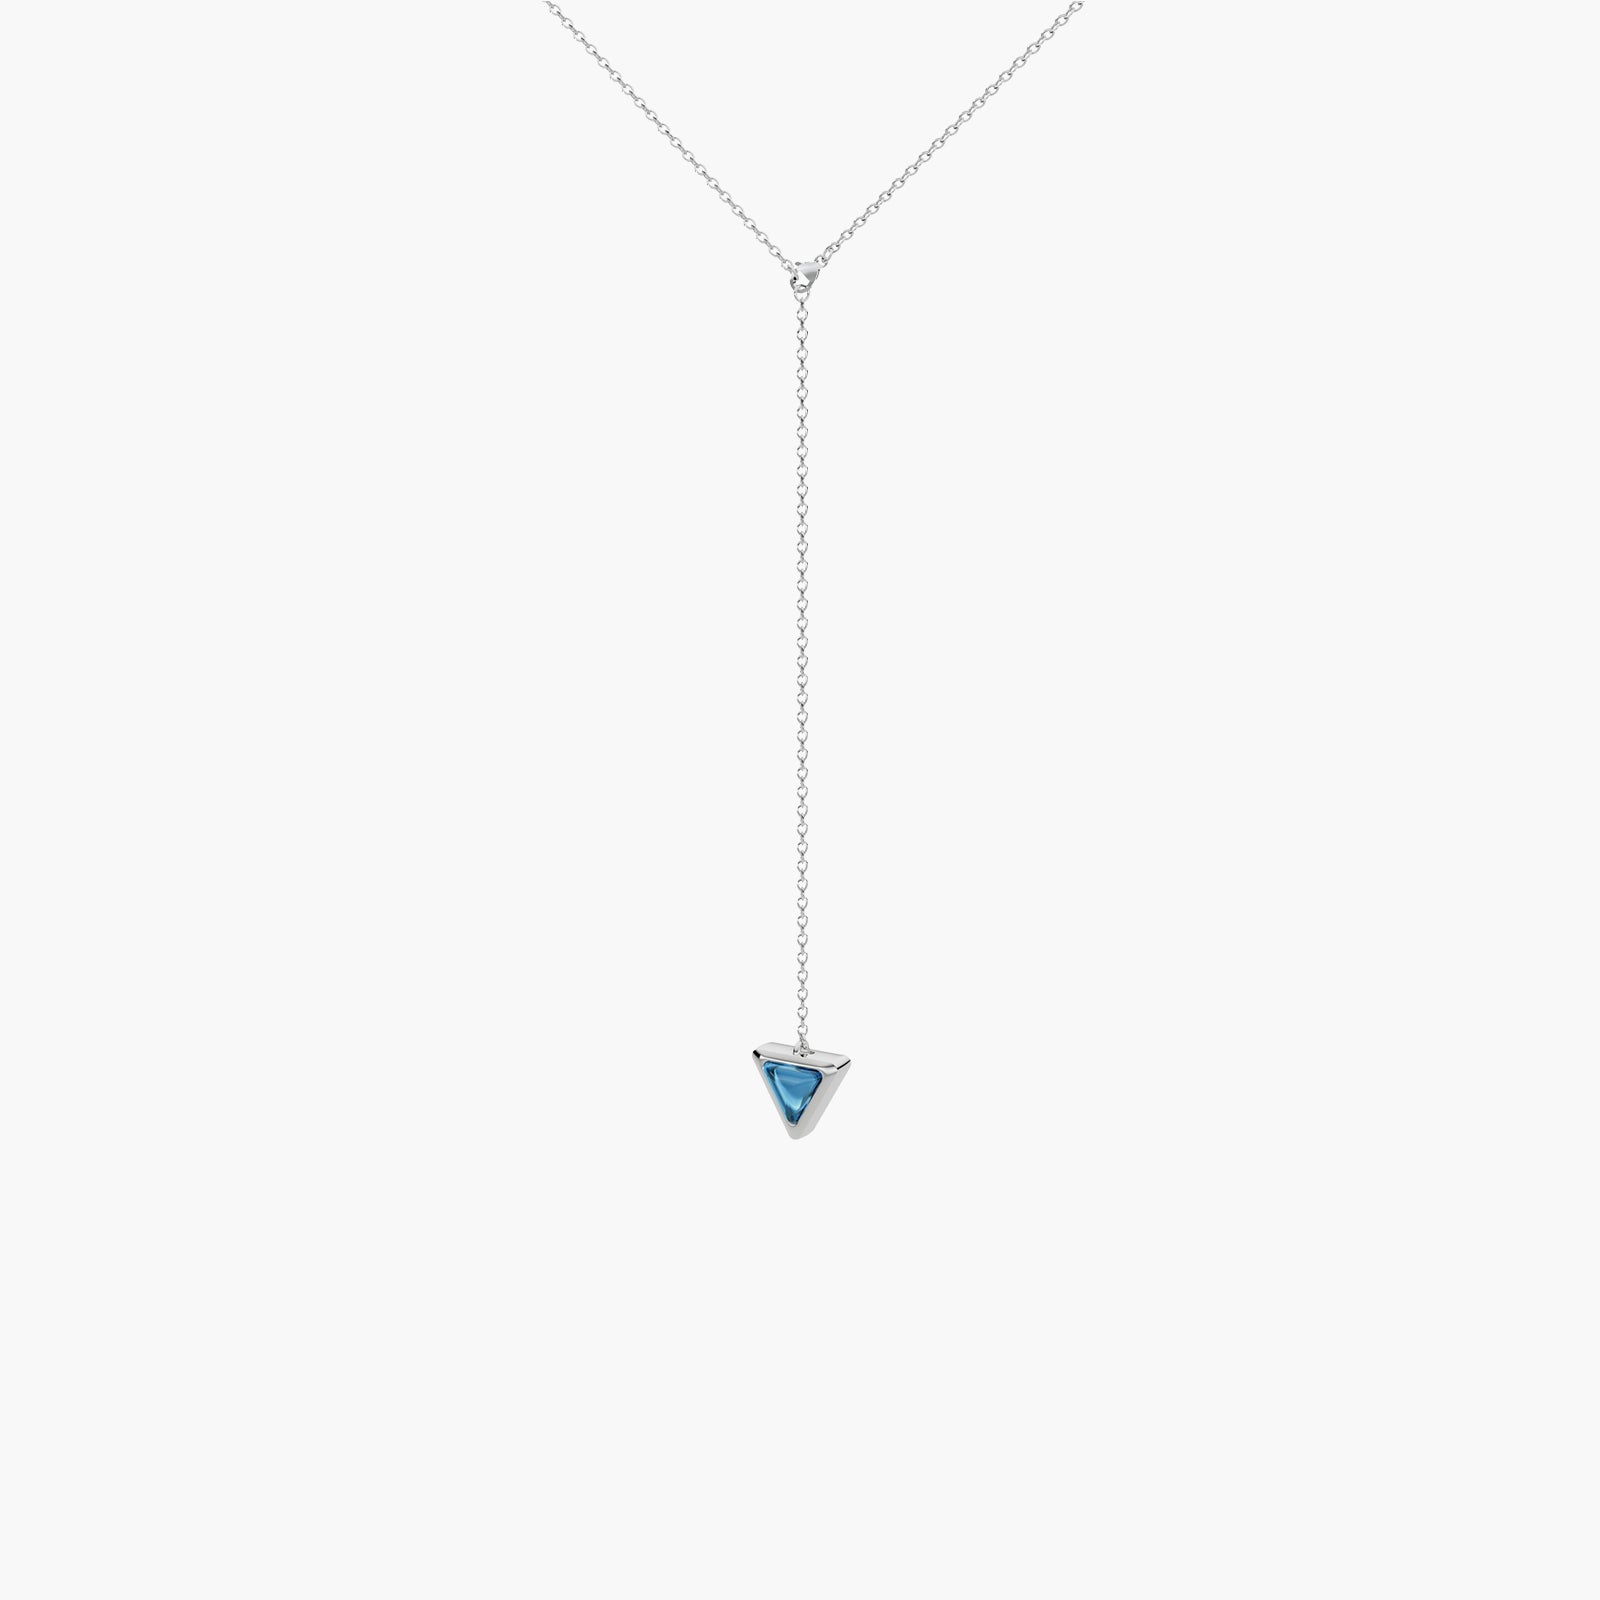 Necklace One Mirror Exquisite White Gold Blue Topaz and Diamonds